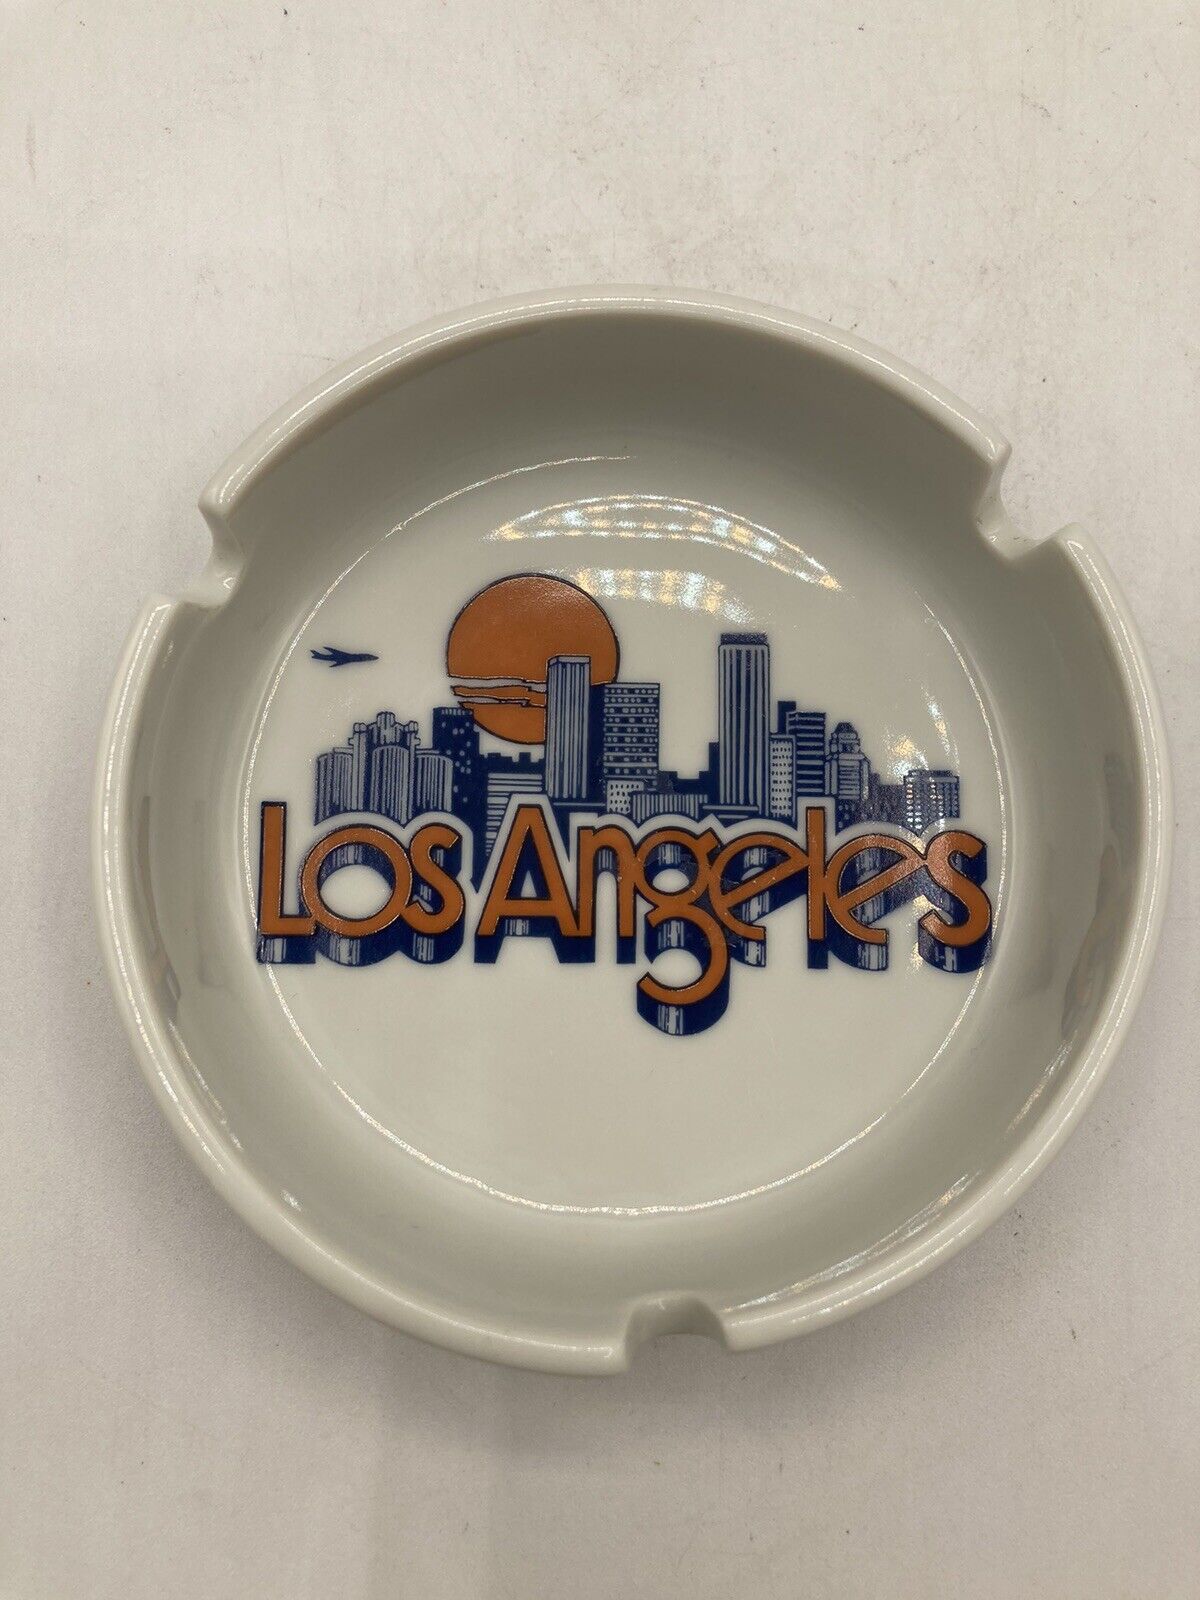 Vintage Ceramic City Of Los Angeles Ashtray, Made In USA - Papel, California.